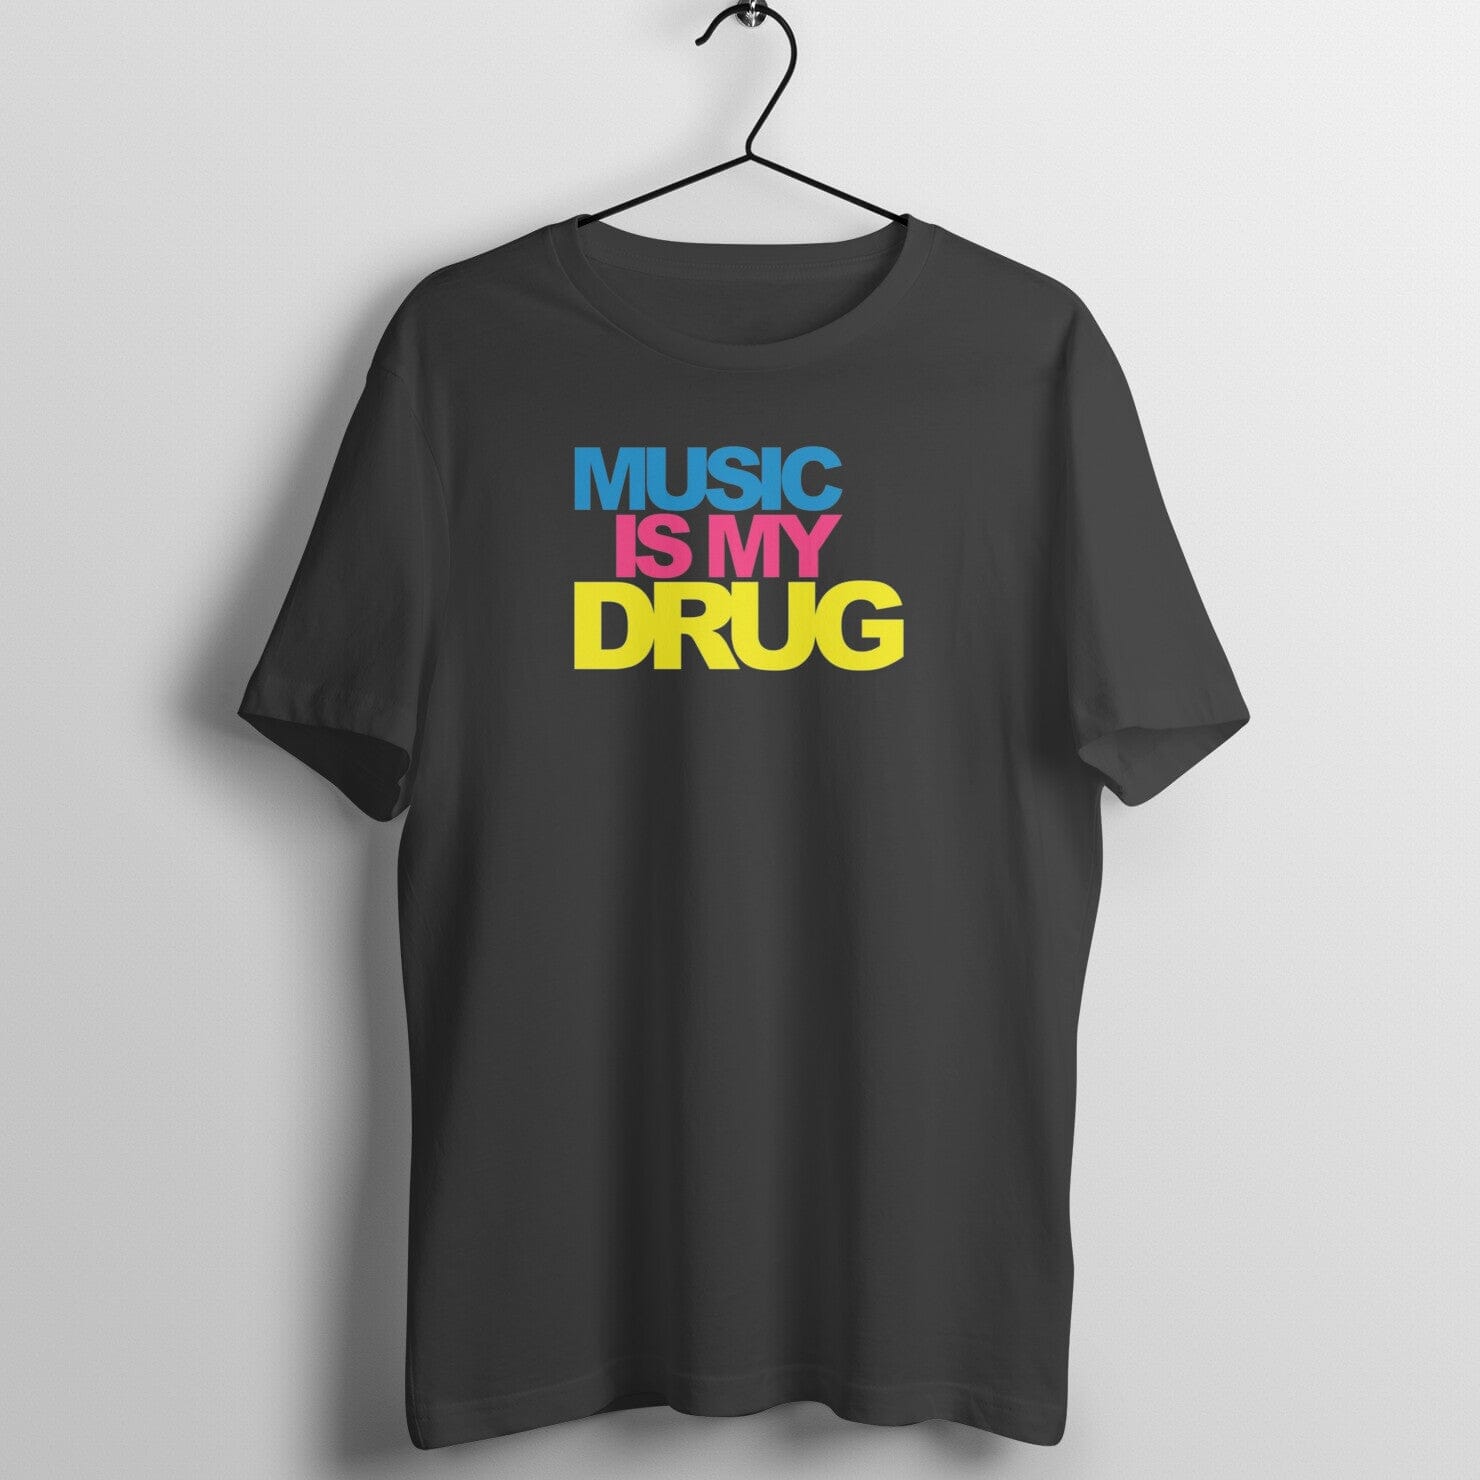 Music is My Drug Exclusive Black T Shirt for Men and Women Printrove Black S 